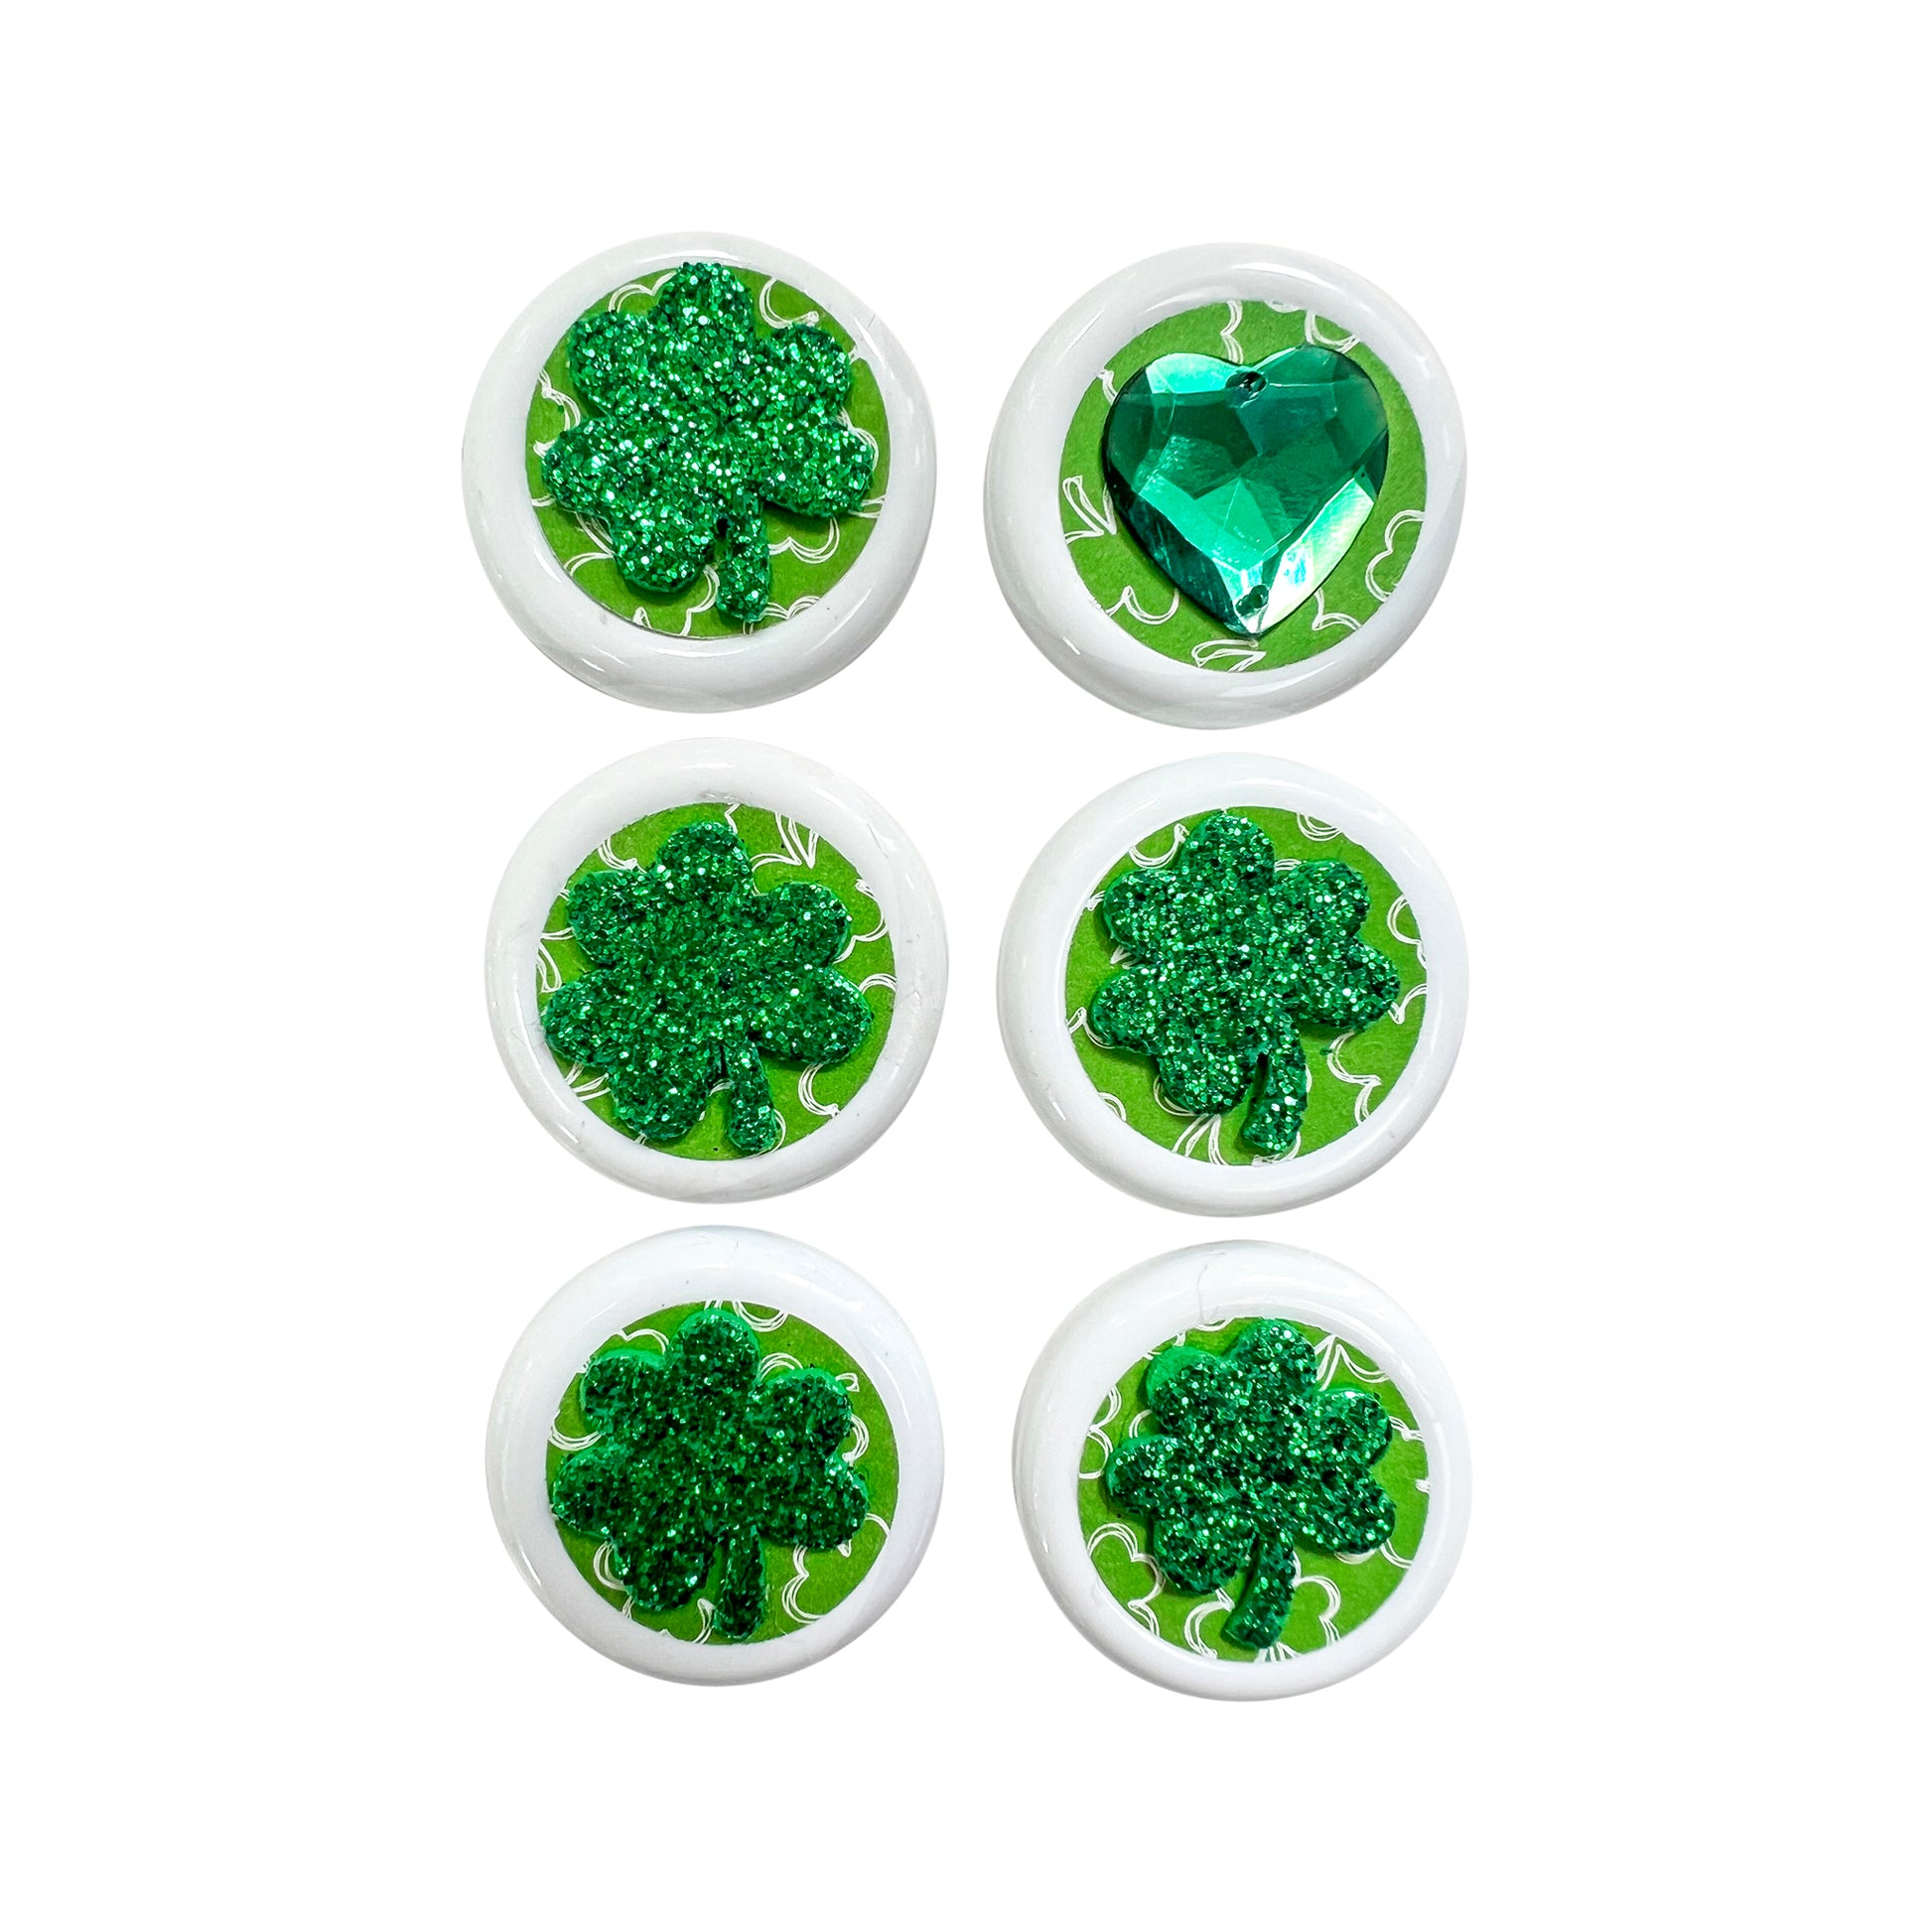 Glass Wrappings set of 6 white button embellishments, 5 topped with green glitter shamrocks, and 1 with a green gem heart.